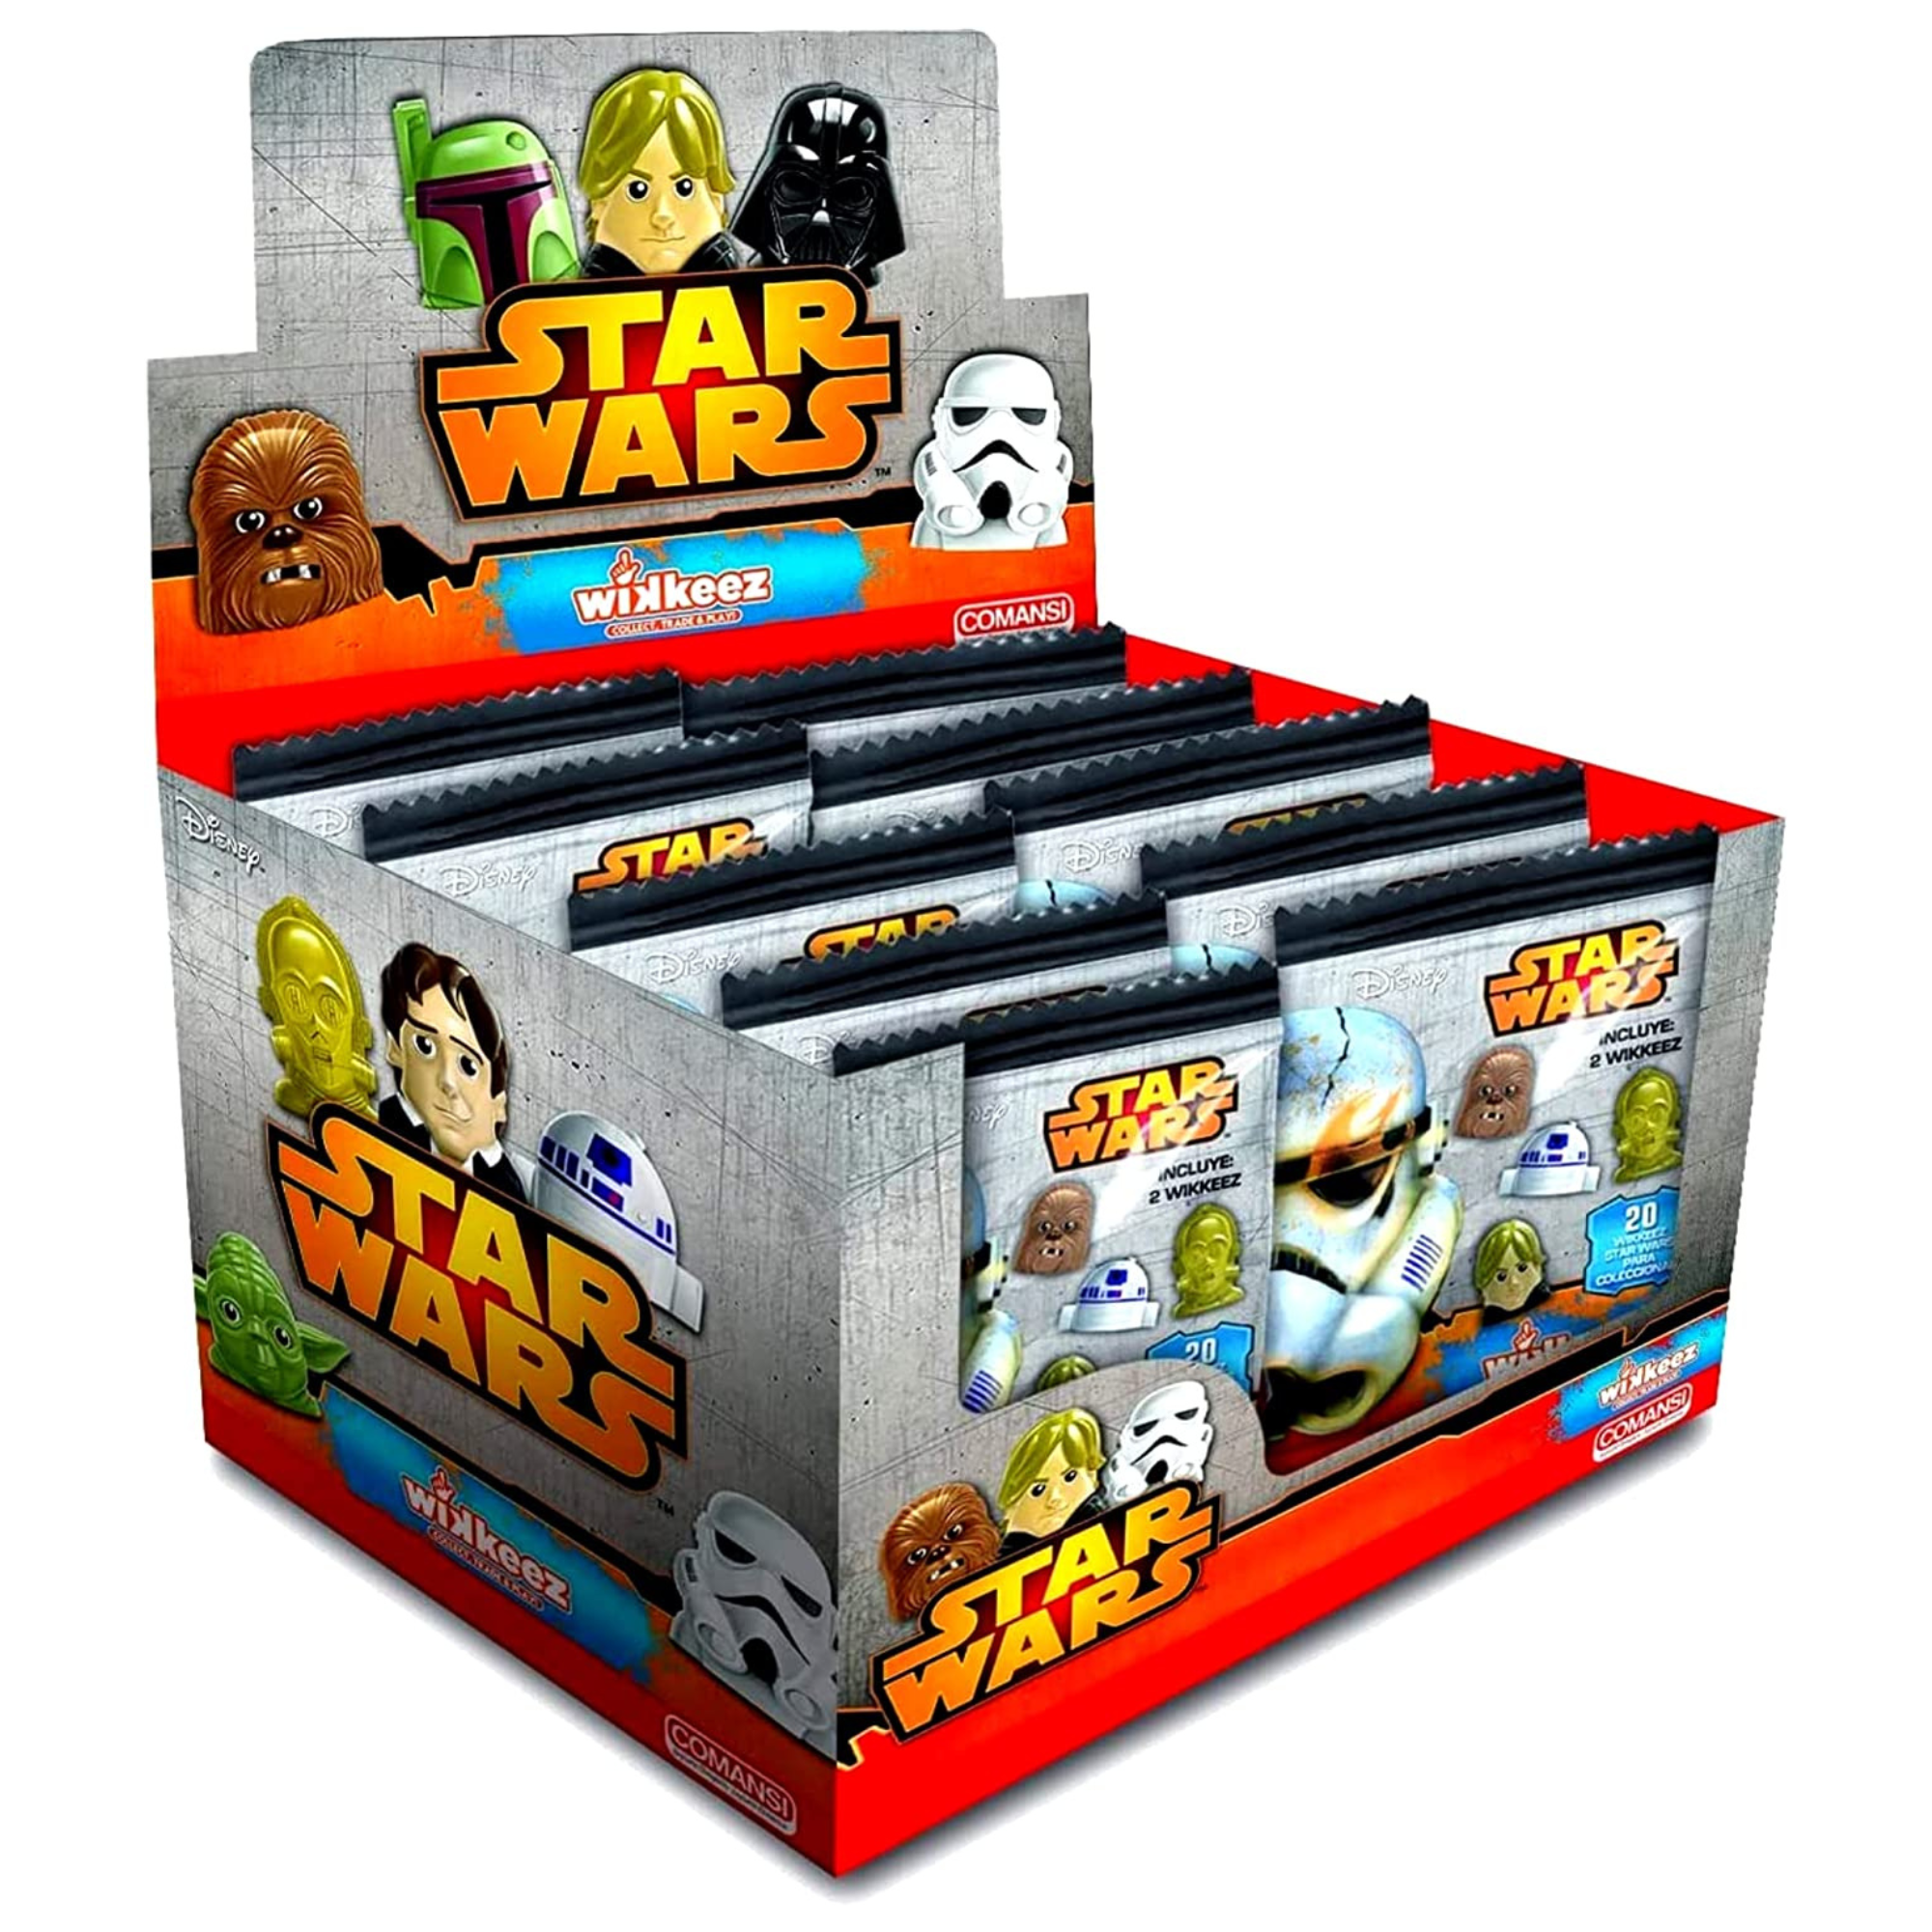 Star Wars Wikkeez Blind Bag Counter Display Unit of 24 Bags - 2 Characters Per Bag - Toptoys2u